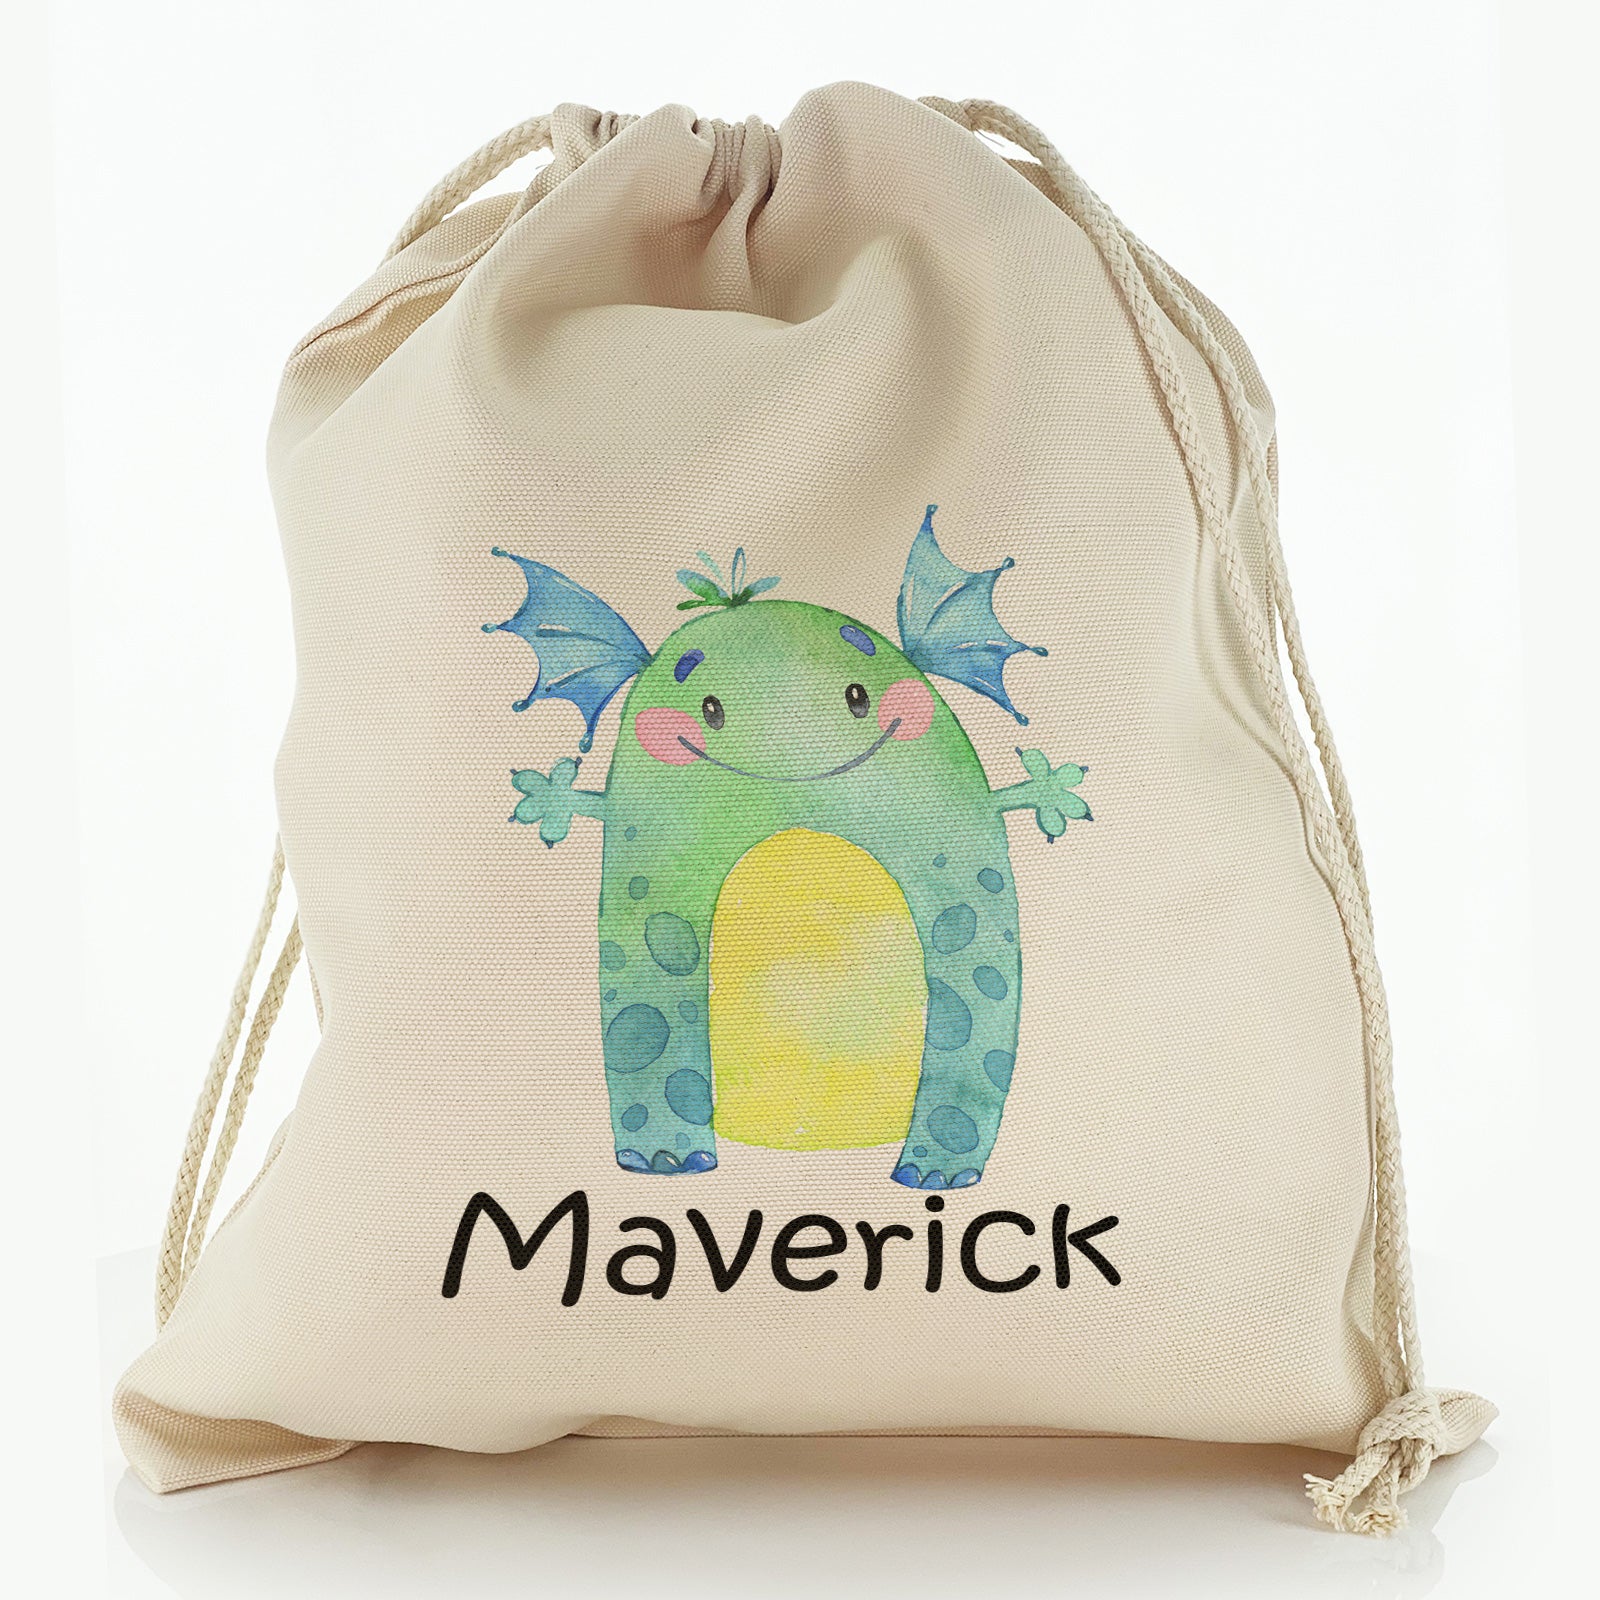 Personalised Canvas Sack with Childish Text and Green Winged Monster